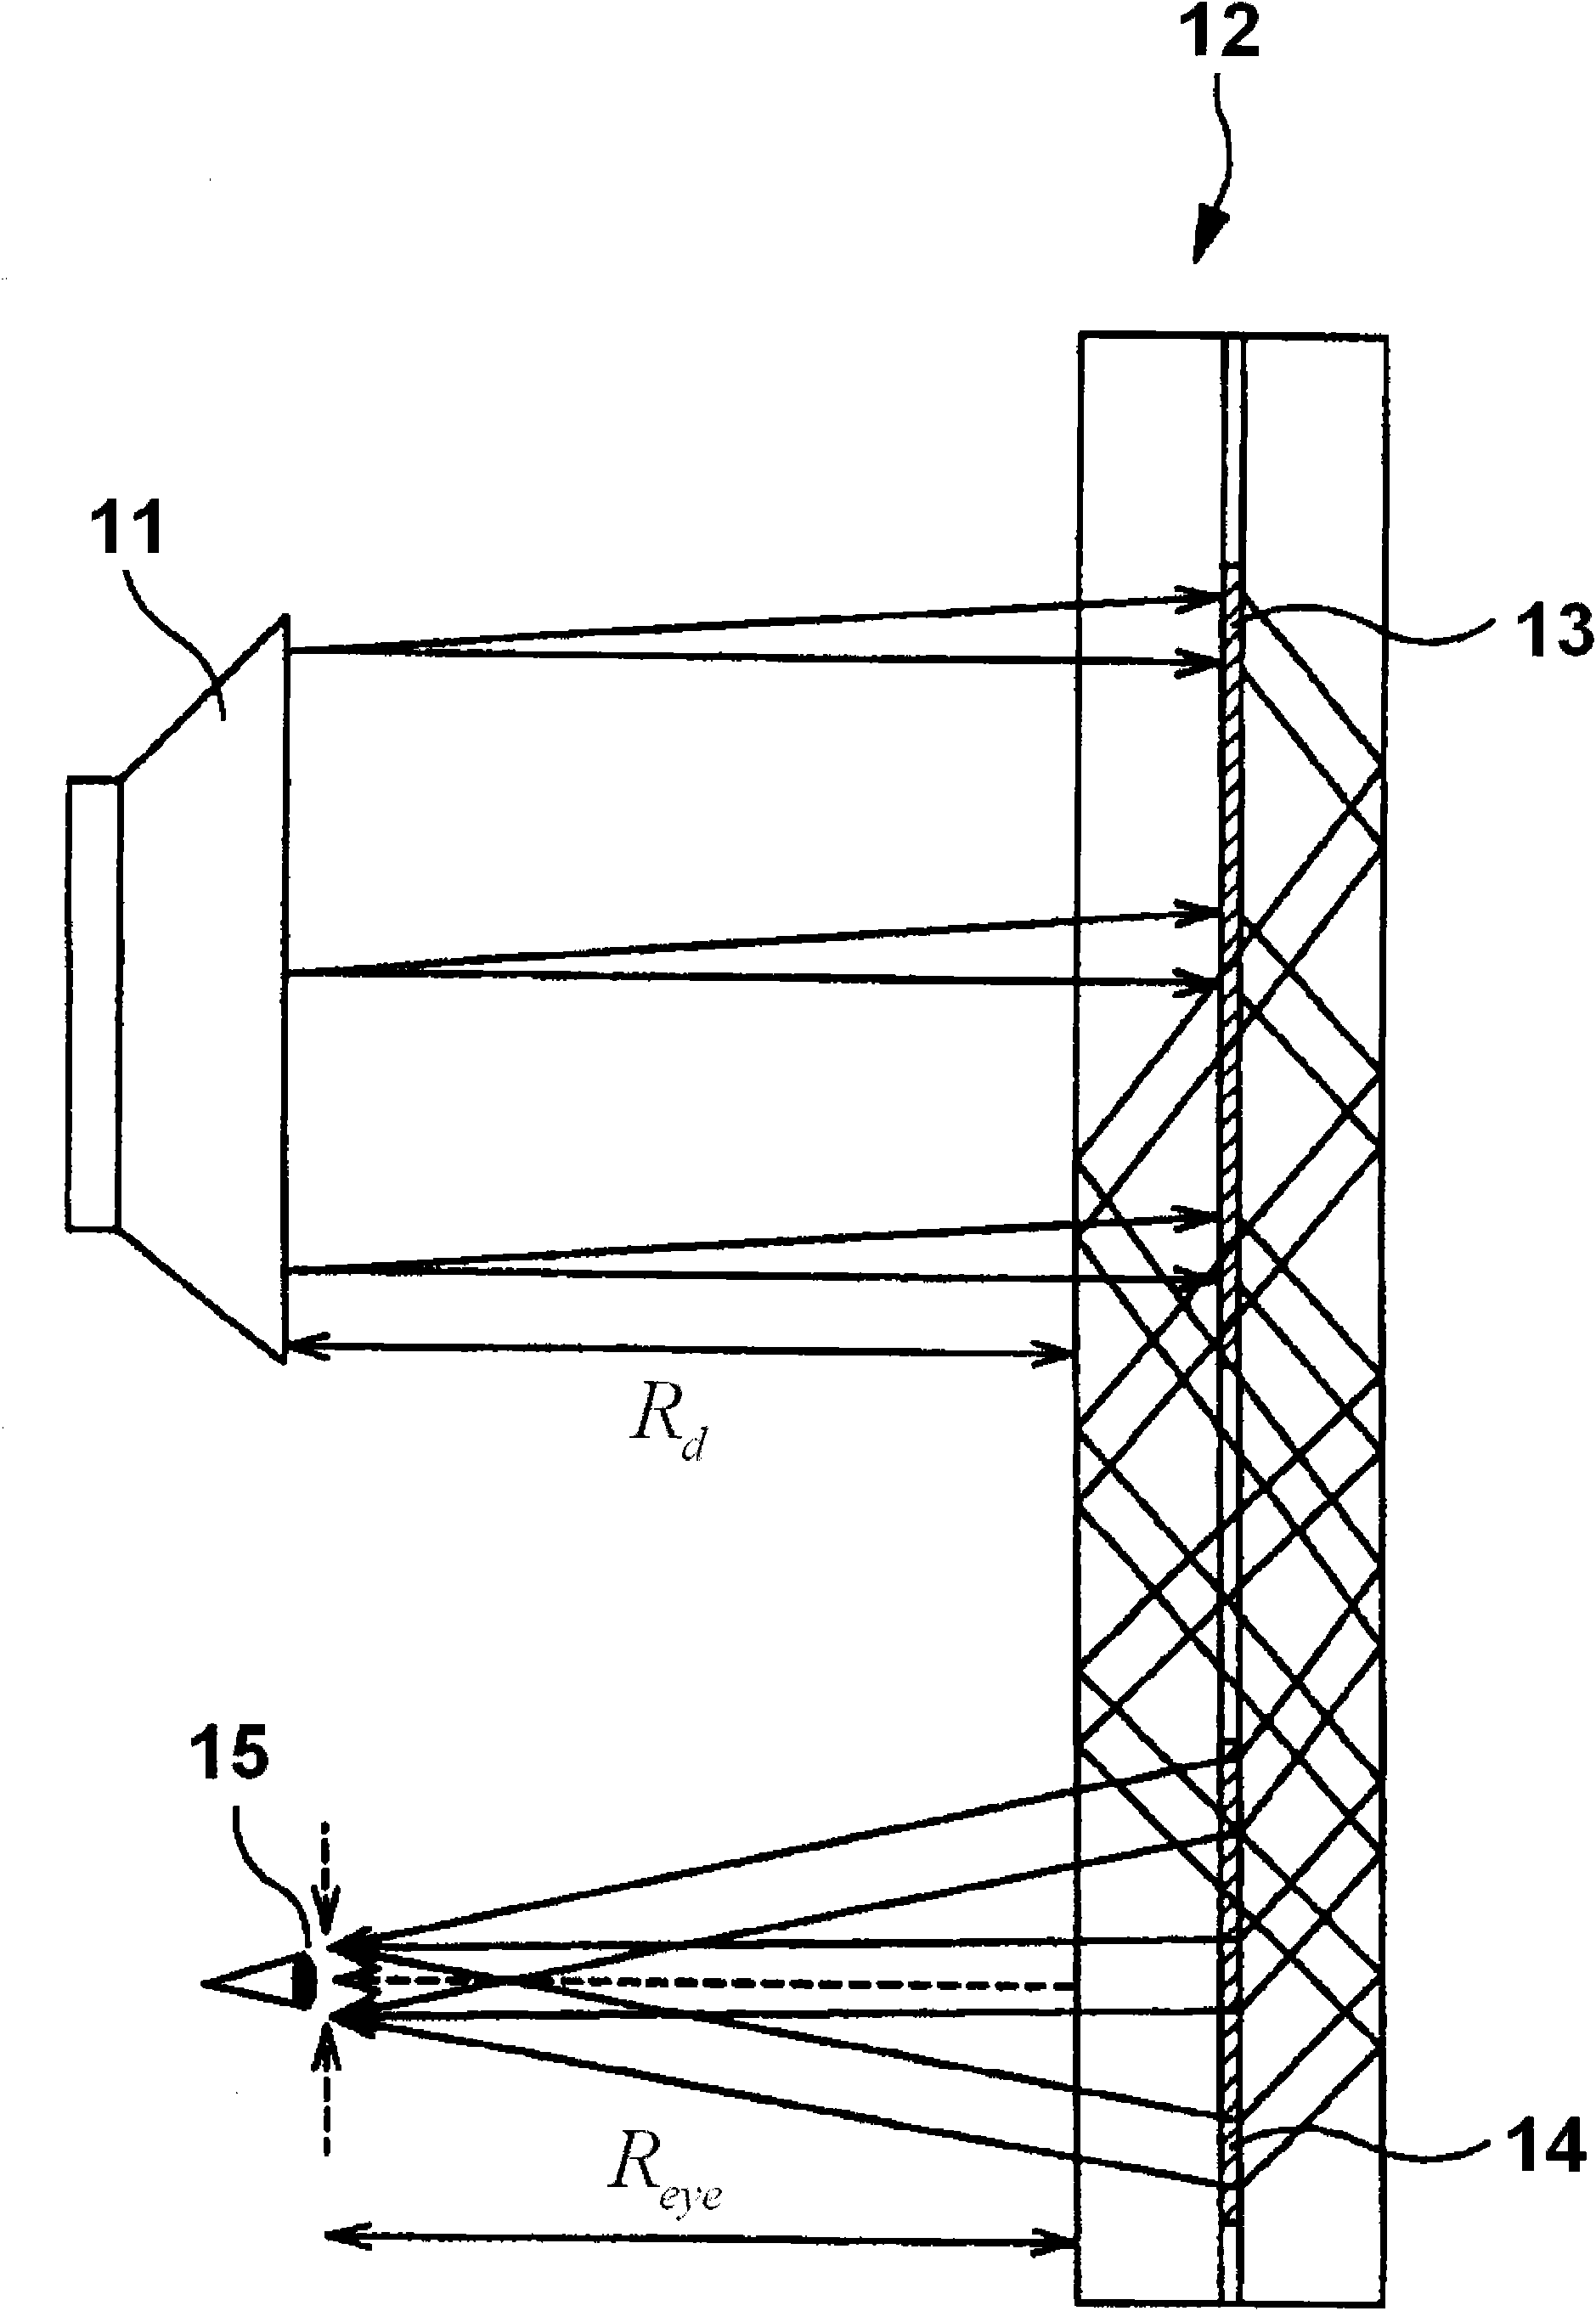 Oxyopter type display device using holographic elements